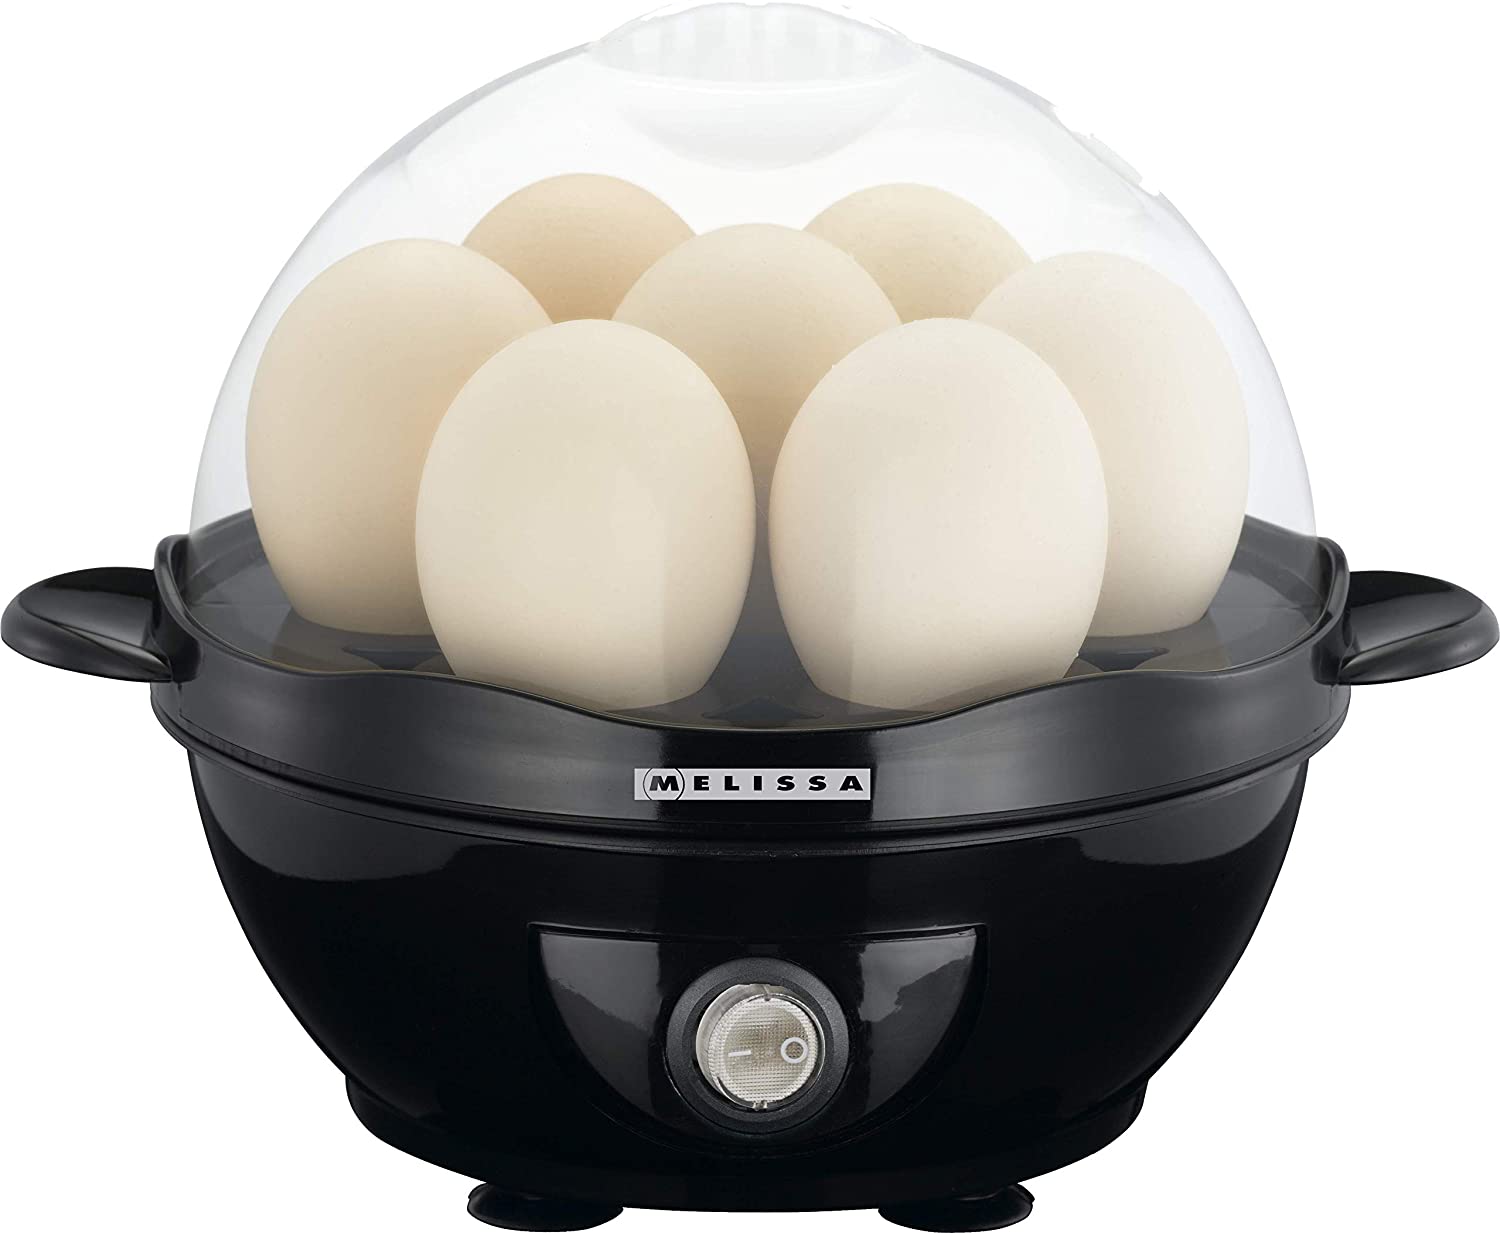 Melissa 16270021 Egg Boiler Ideal for up to 7 People, 7 Eggs, Summer Beep, Black, On/Off Switch